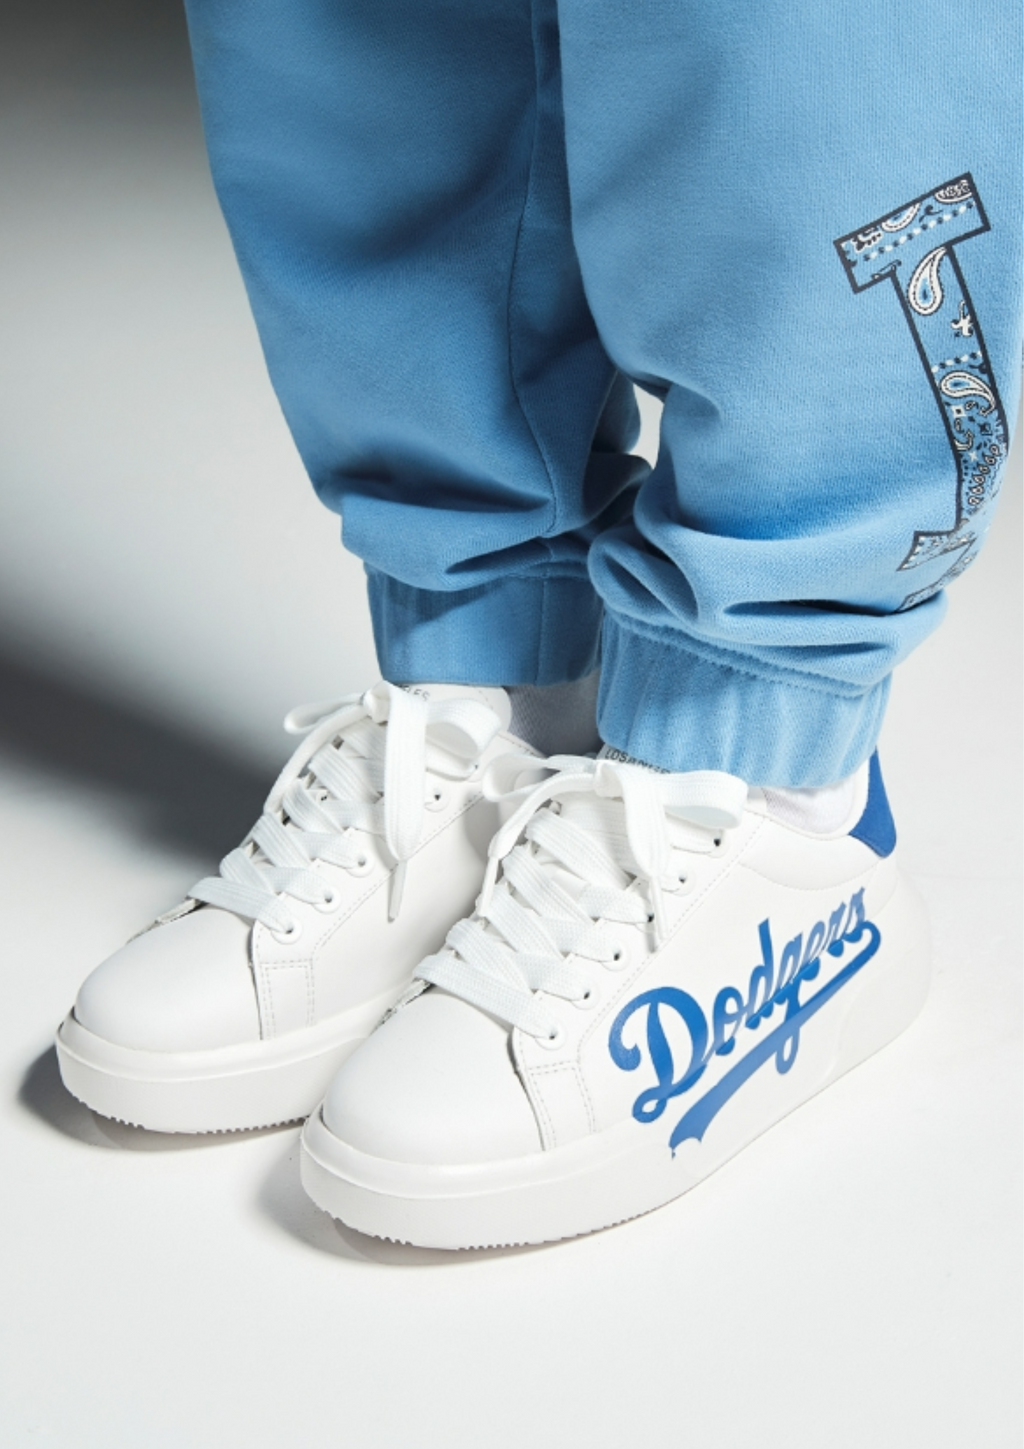 MLB BIG BALL CHUNKY A LA DODGERS OFF-WHITE – The Factory KL